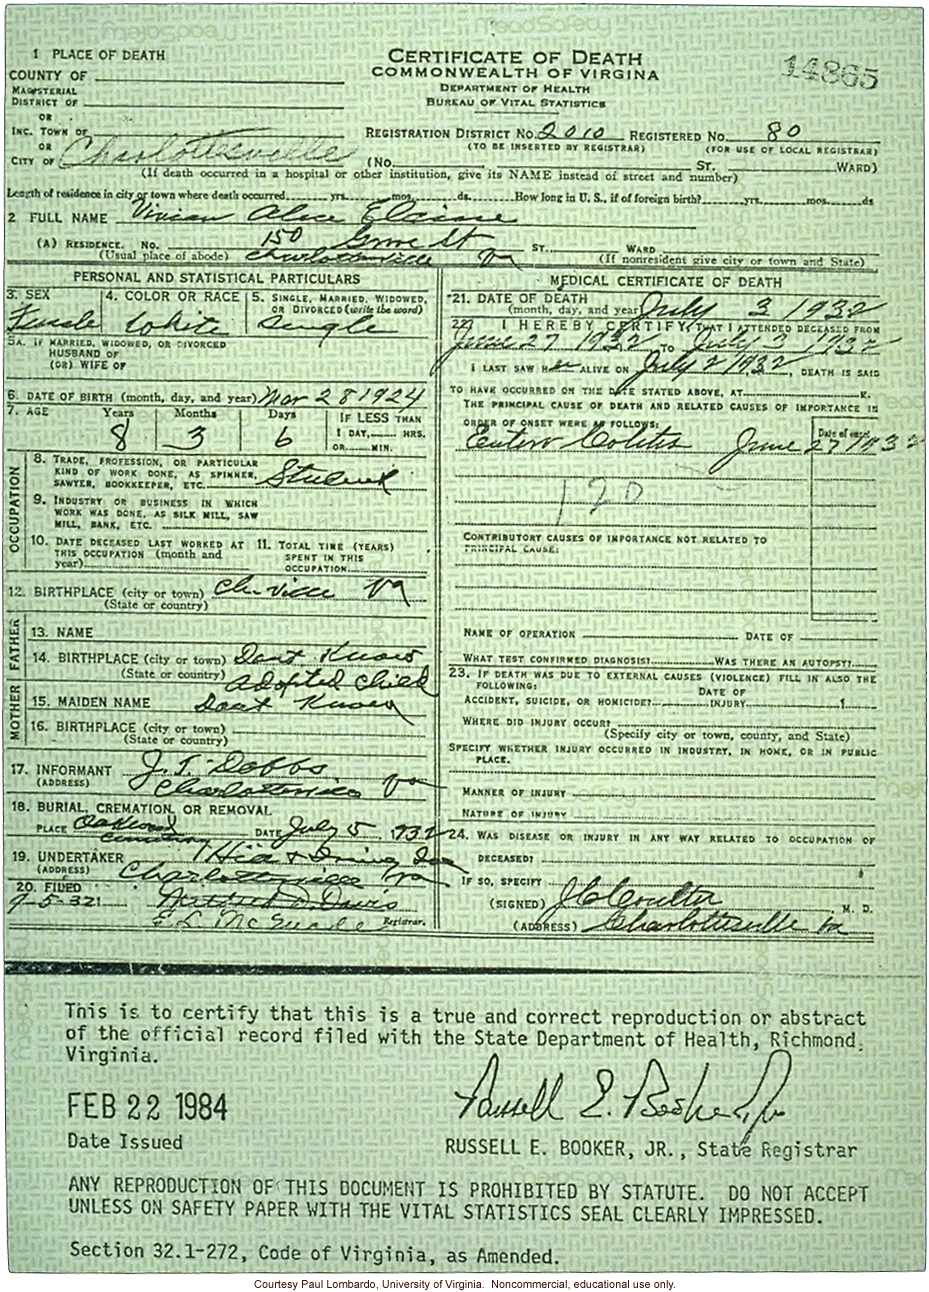 Death certificate of Carrie Buck's daughter, Vivian, who died of &quote;entero colitis&quote; at age 8